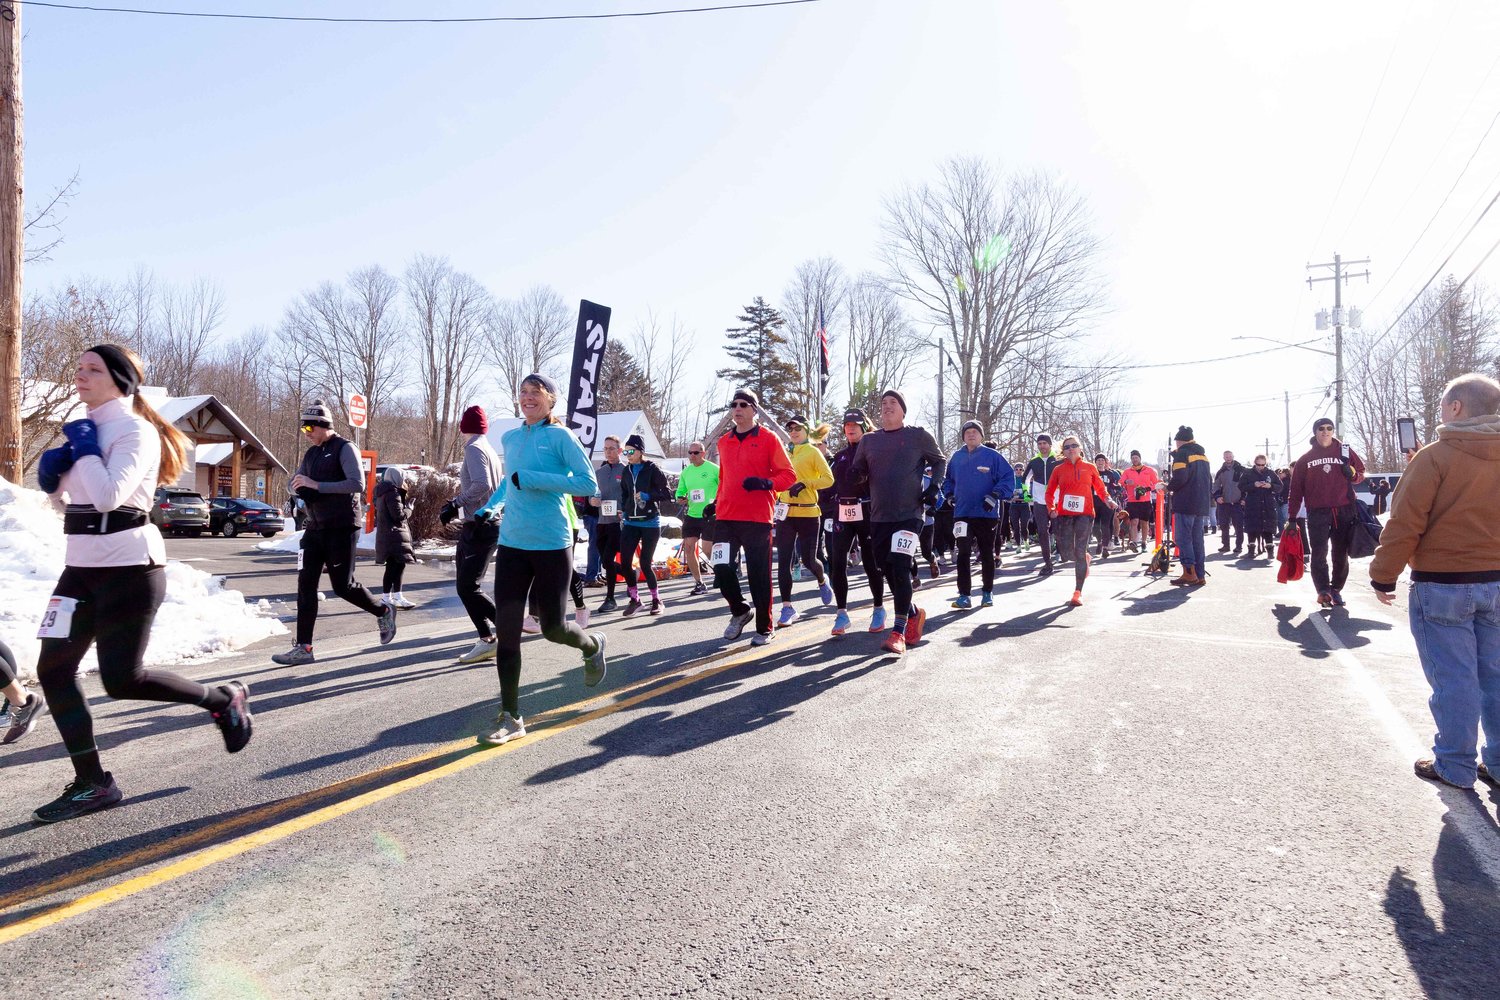 Let the race begin! Runners from all corners of the region flocked to Rock Hill to celebrate the 20th Anniversary and final Celebrate Life Half Marathon and Lucia Rein Two-Person Relay to push their limits and reach for the finish line.